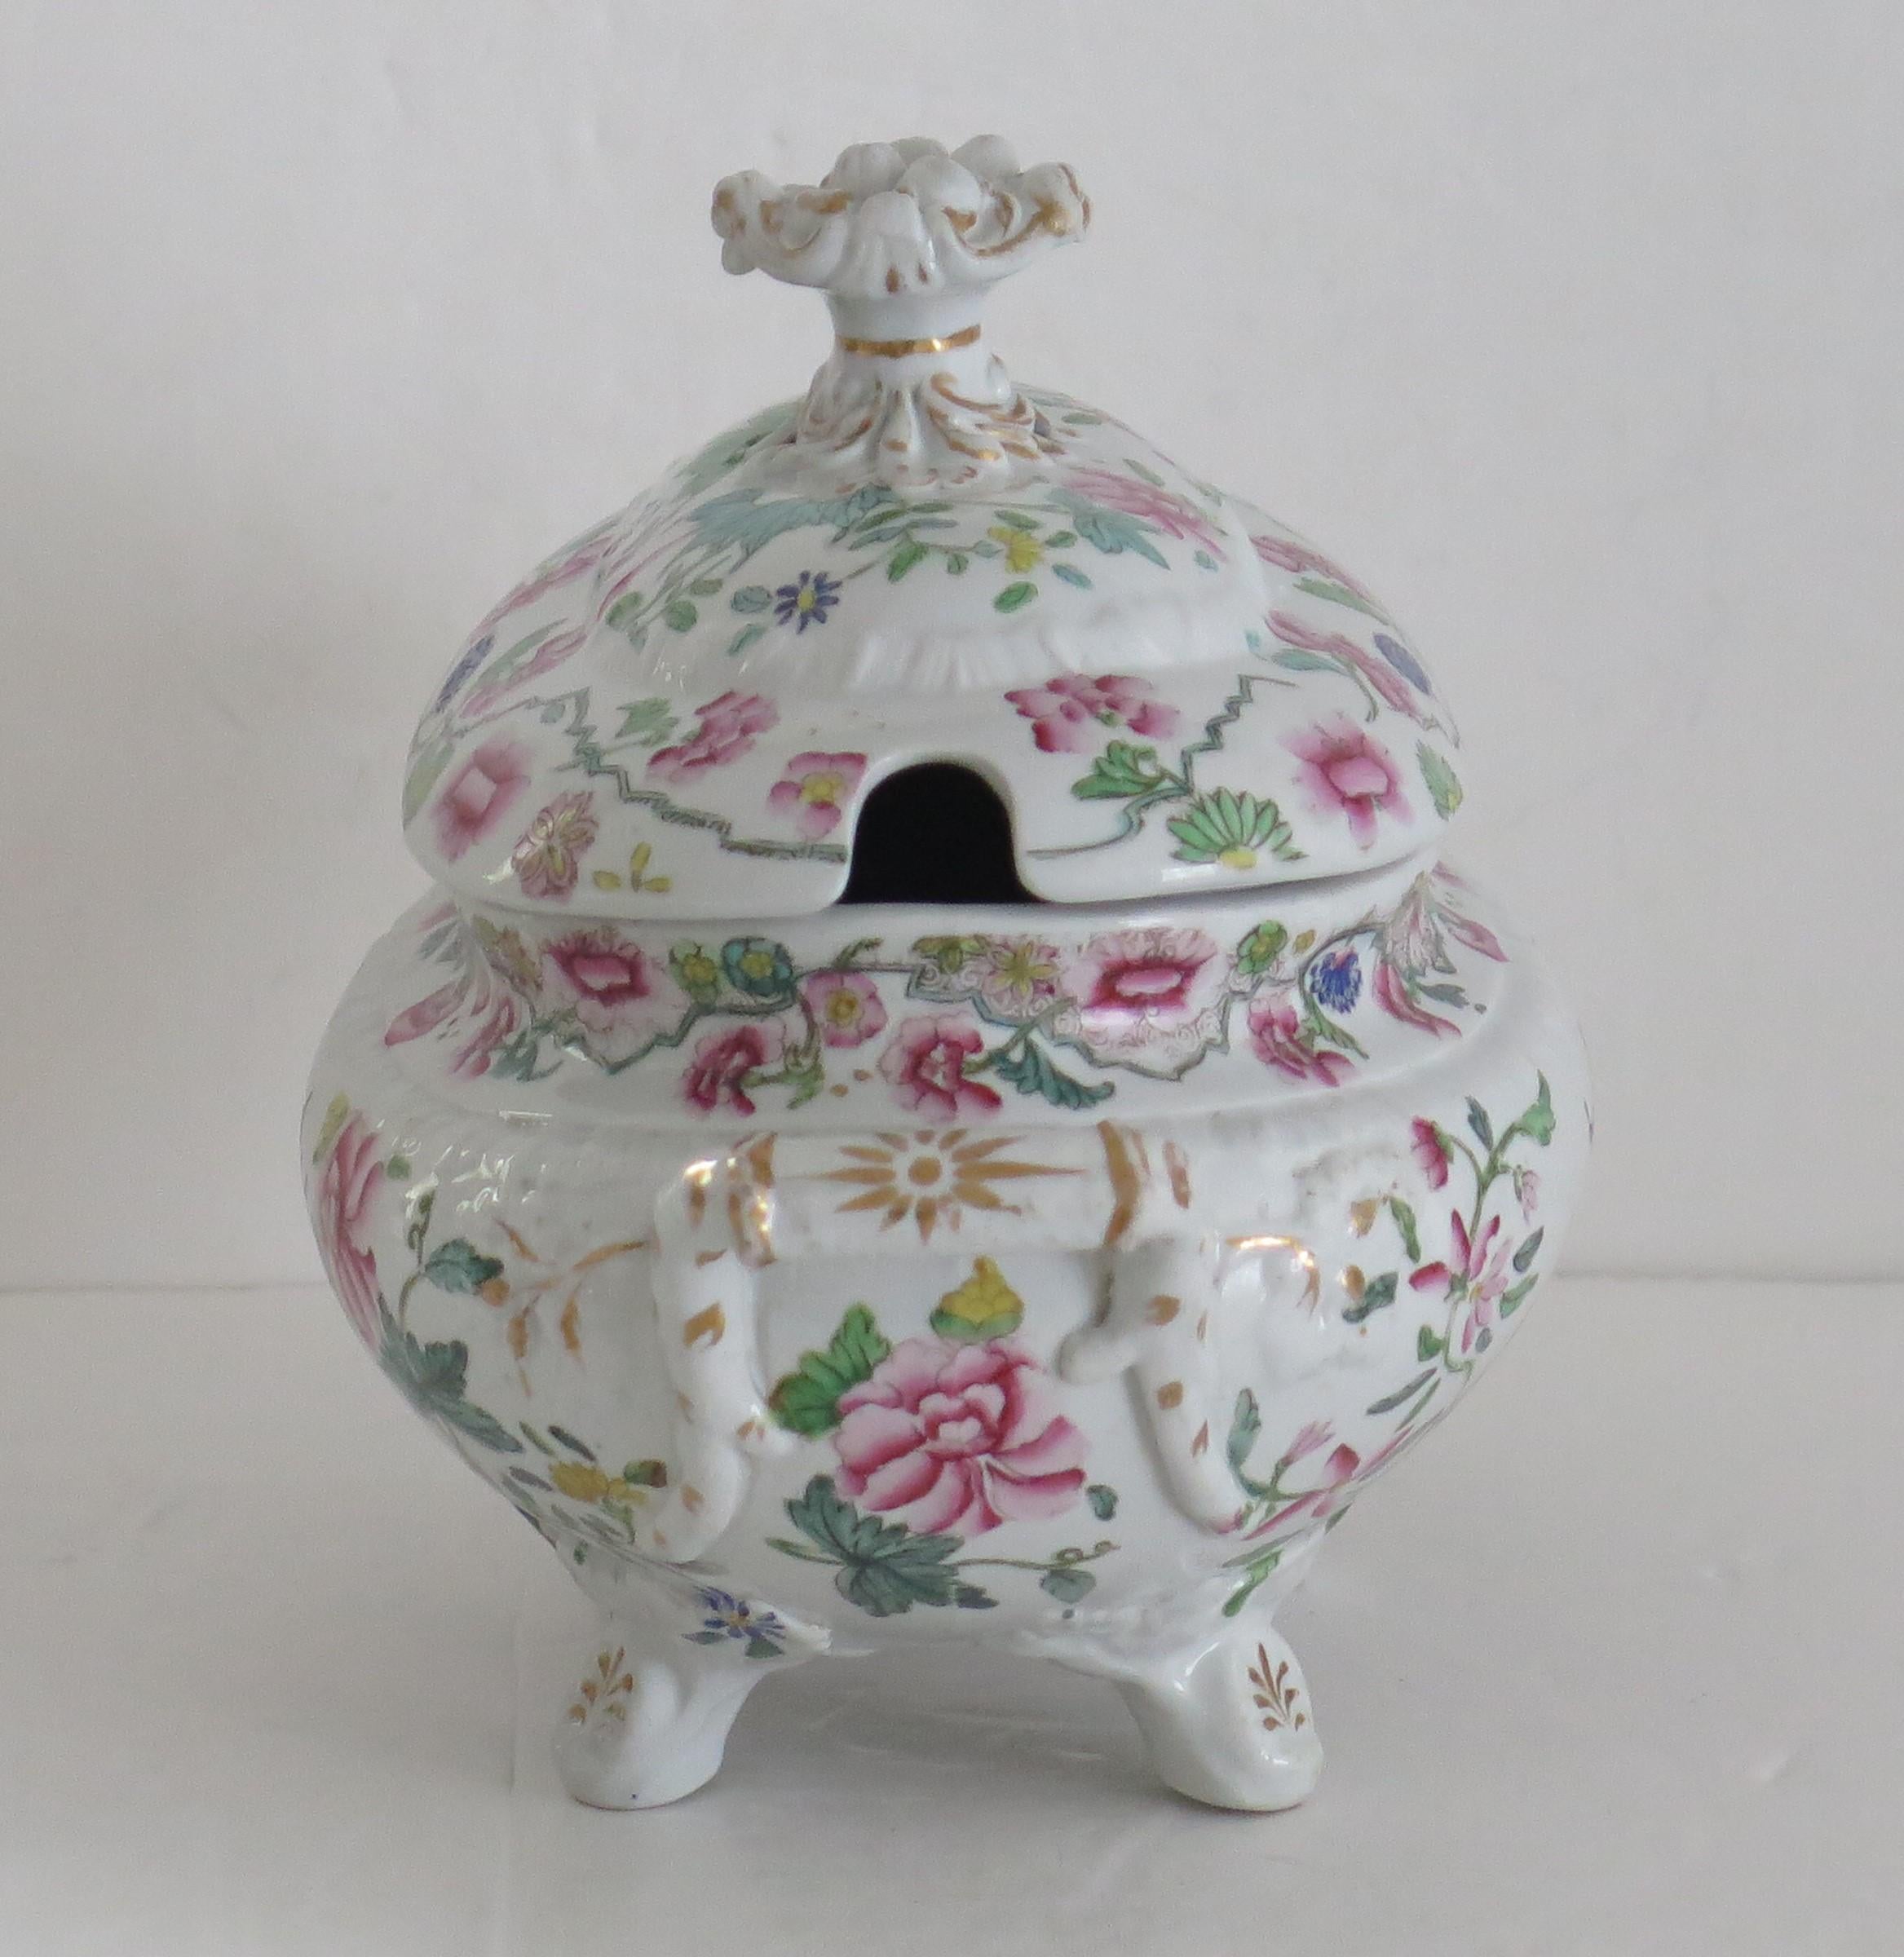 George III Georgian Hicks and Meigh Ironstone Sauce Tureen Floral Pattern No.8, Circa 1815 For Sale